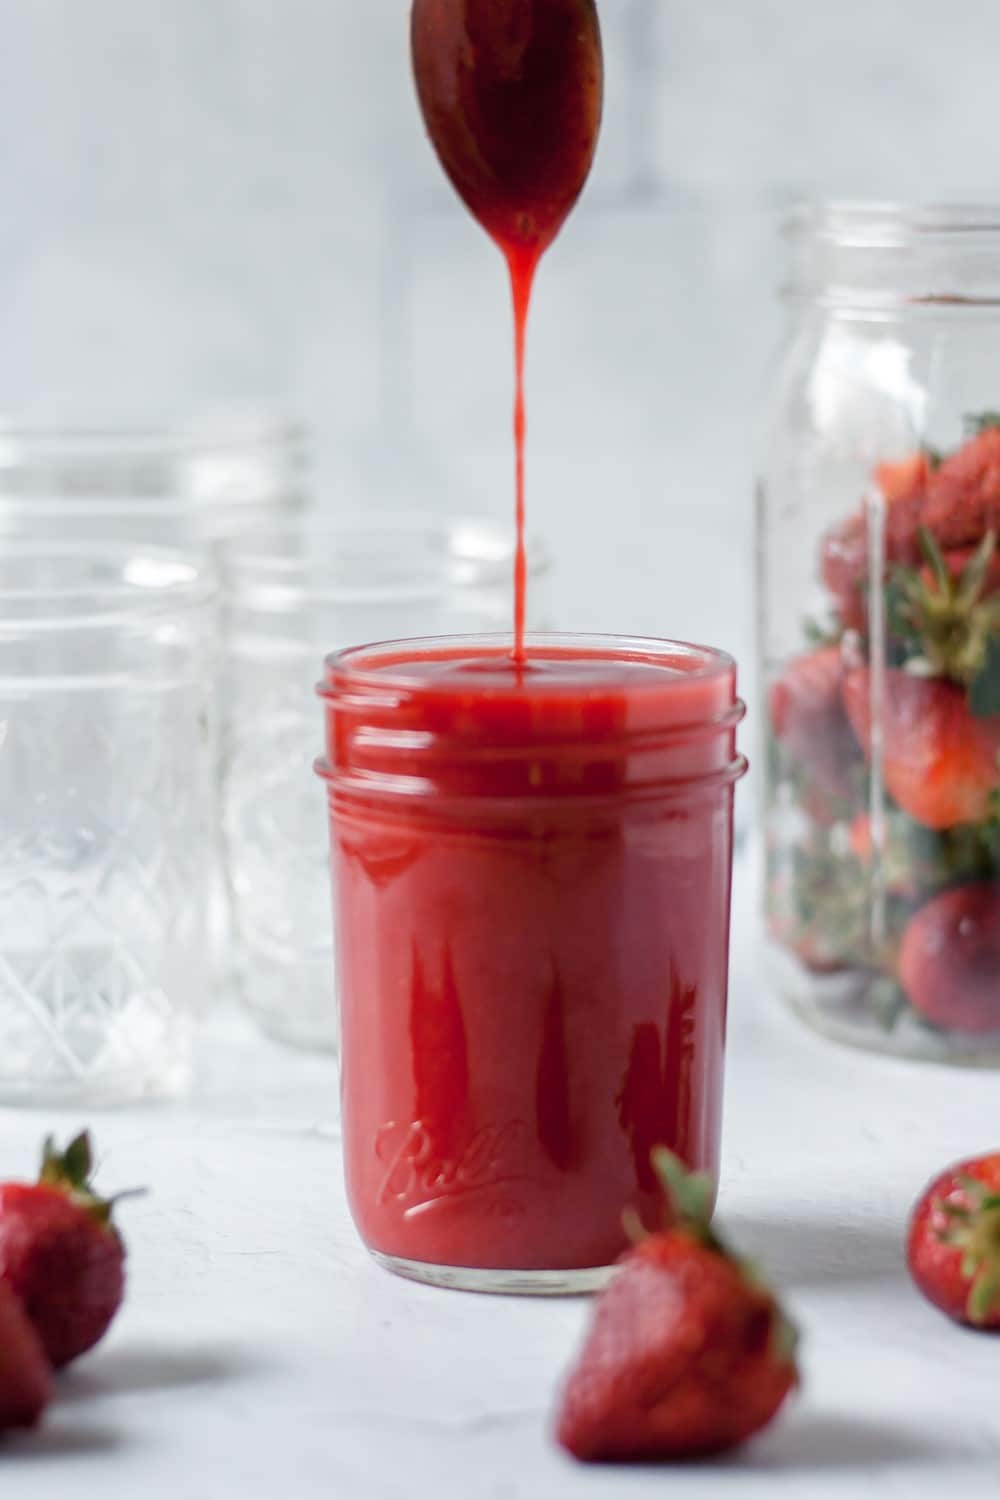 Spoon dripping strawberry coulis into glass mason jar.